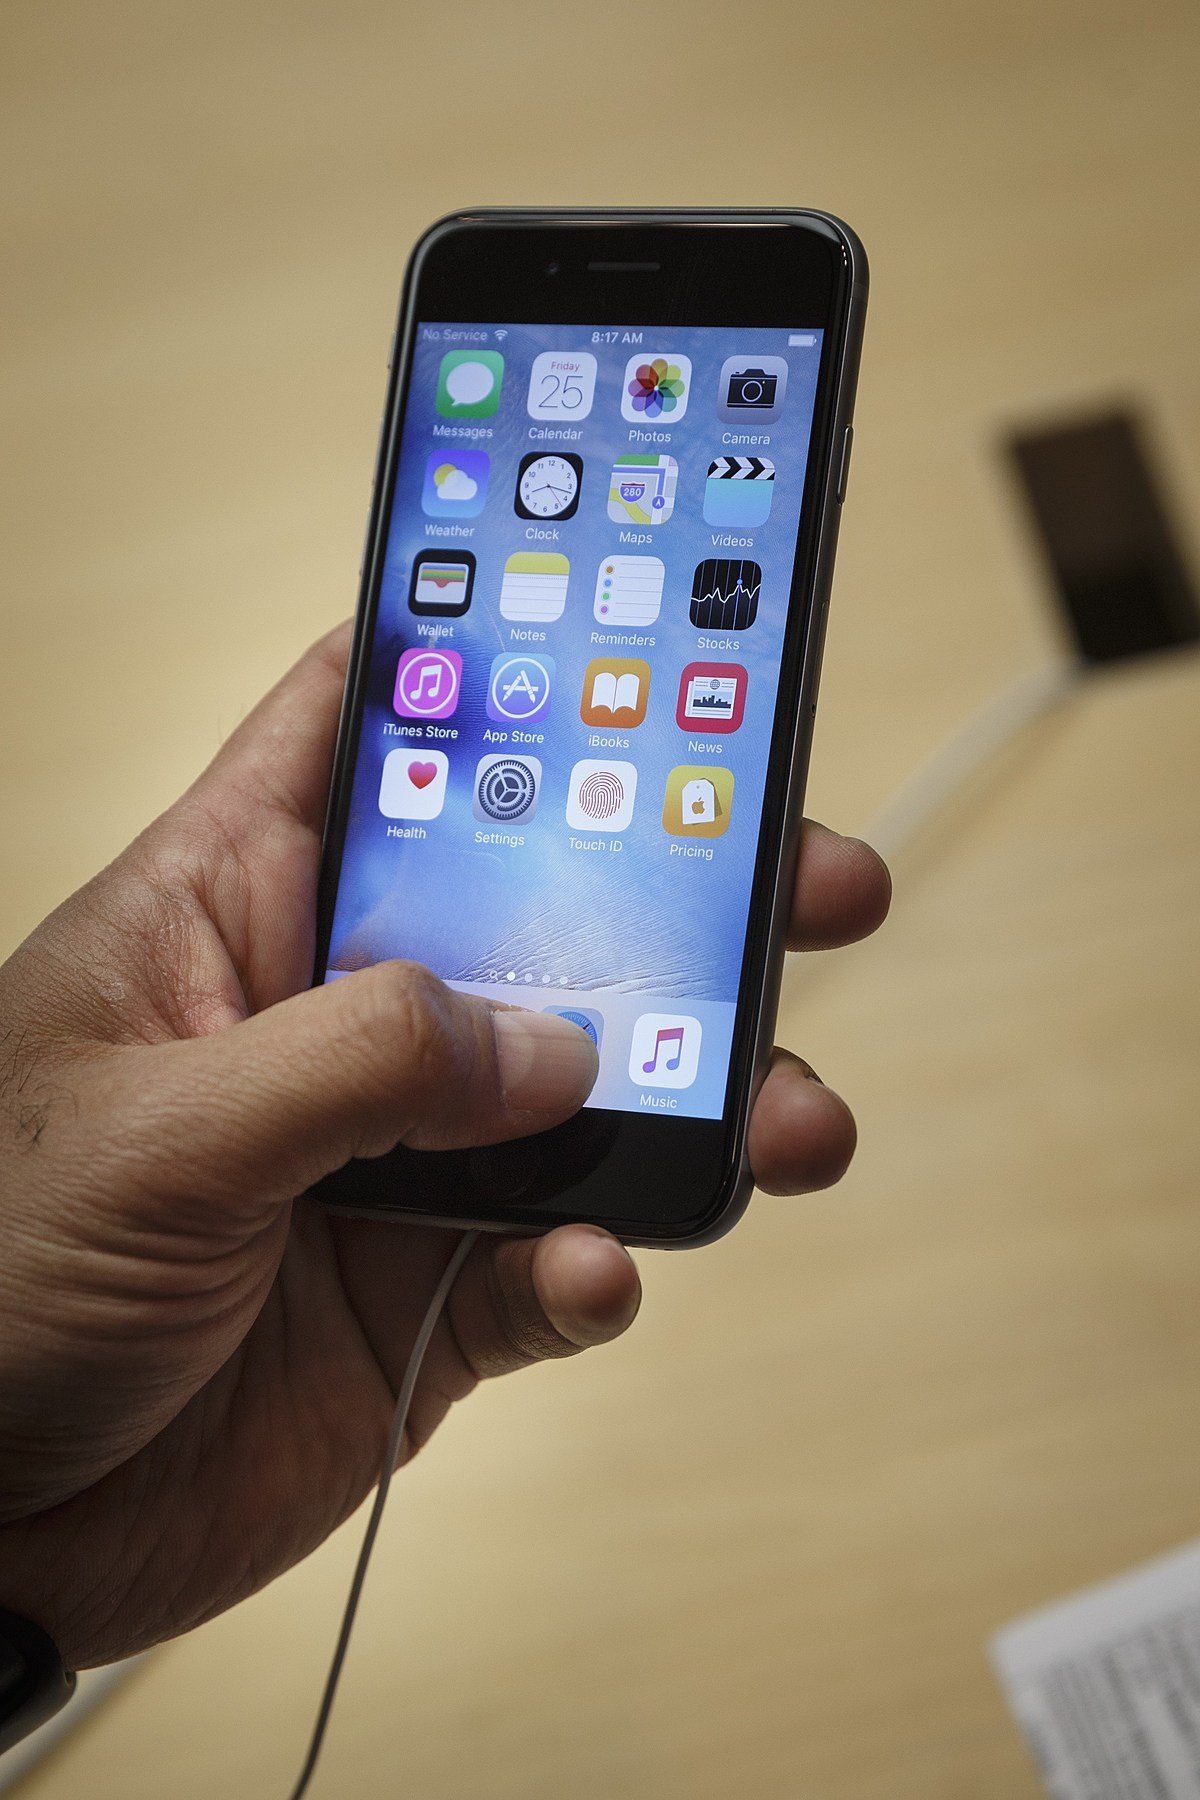 The New iPhone 6s Put to the Test